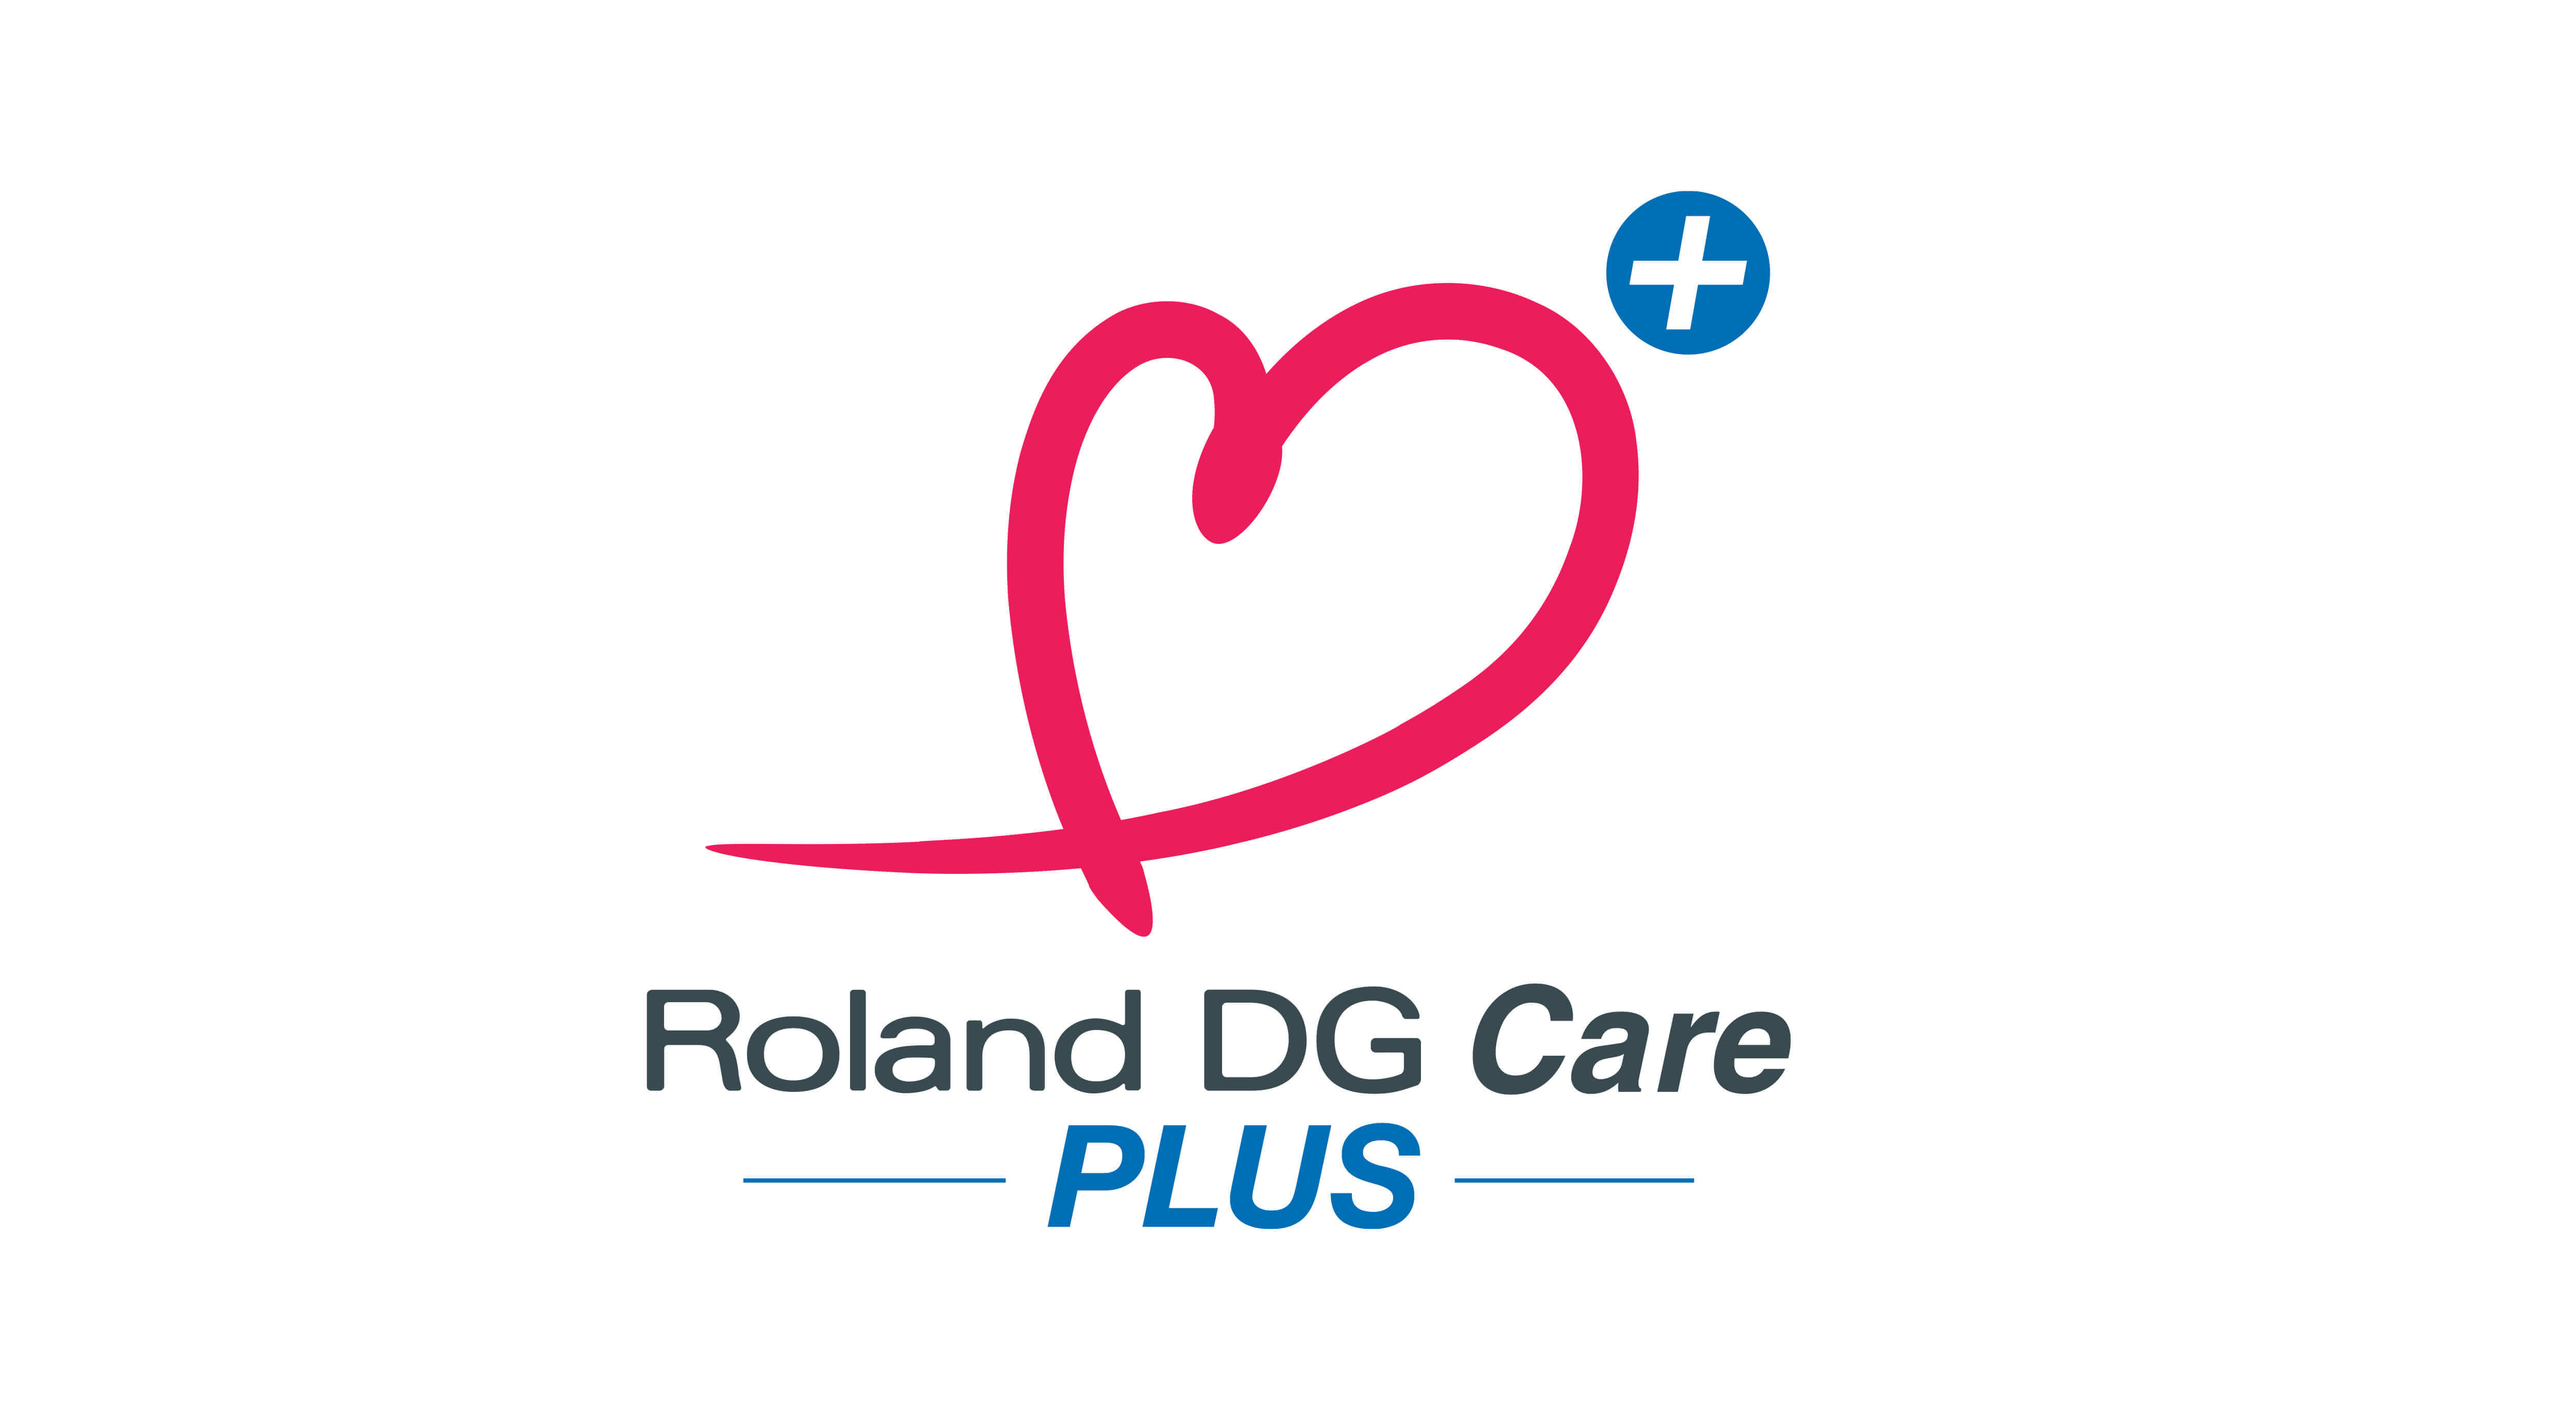 Roland DGA has introduced a new Roland DG Care PLUS extended warranty program for TrueVIS printers and printer/cutters.